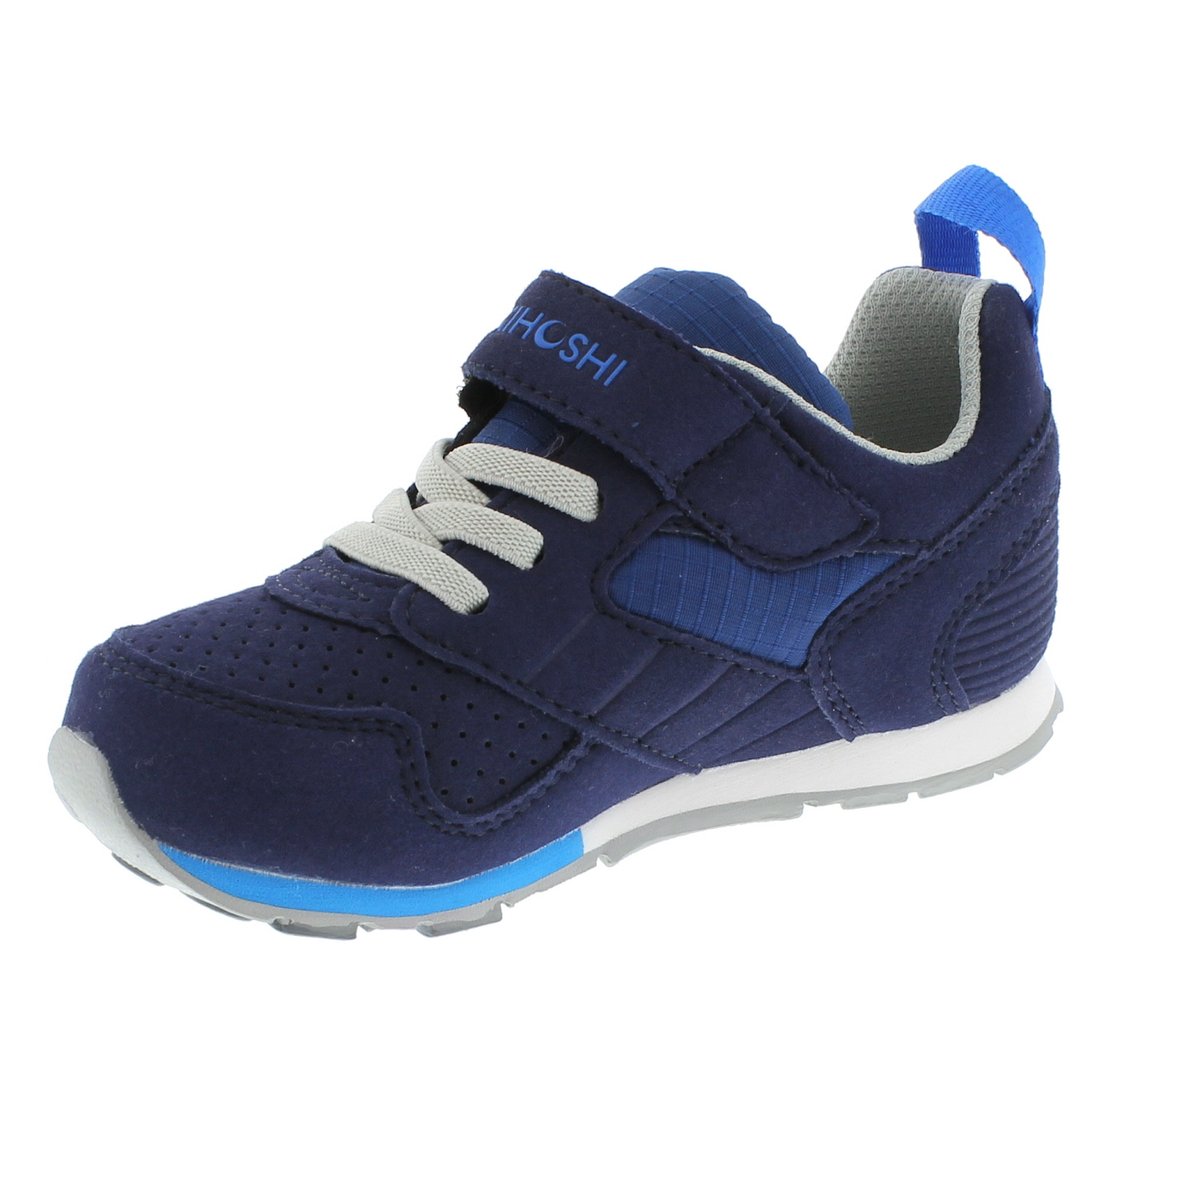 Child Tsukihoshi Racer Sneaker in Navy/Blue from the front view